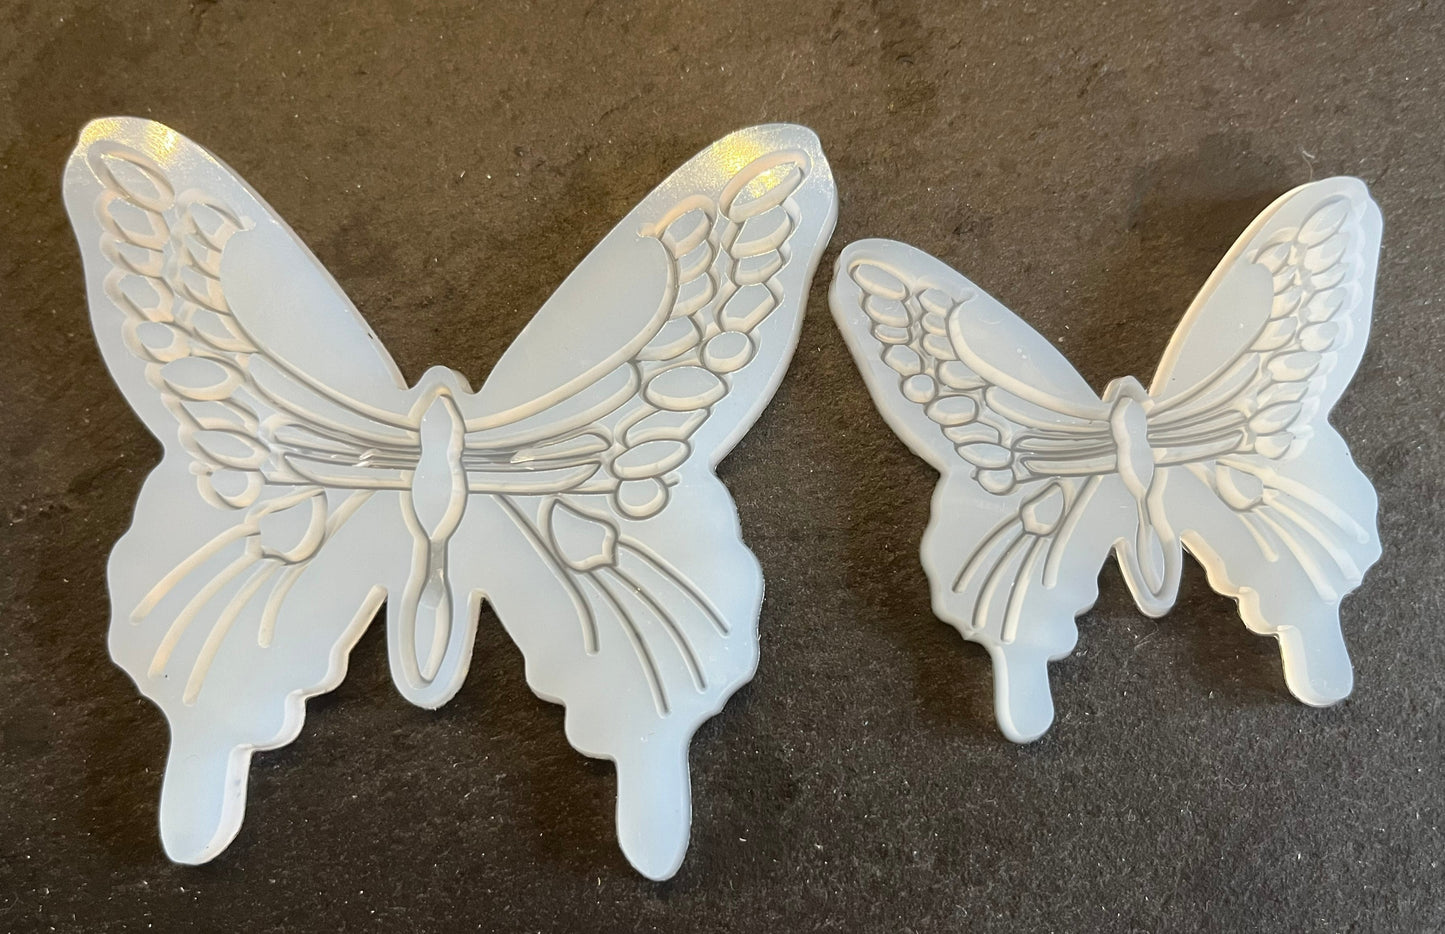 Silicone Inlays for Resin Crafts